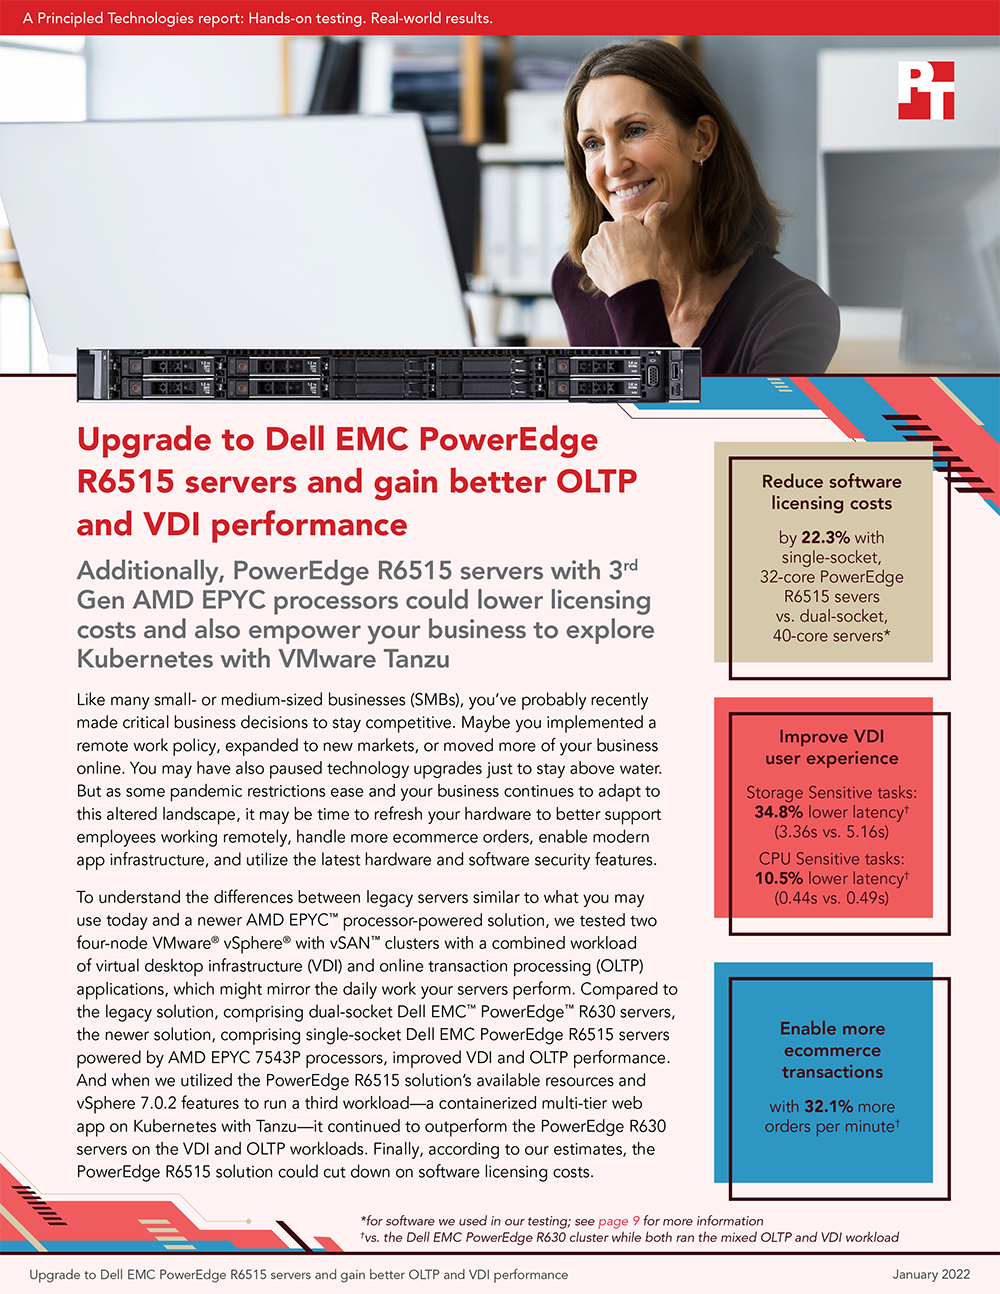 Principled Technologies releases study on Dell EMC PowerEdge 6515 Servers' VDI and OLTP Performance thumbnail